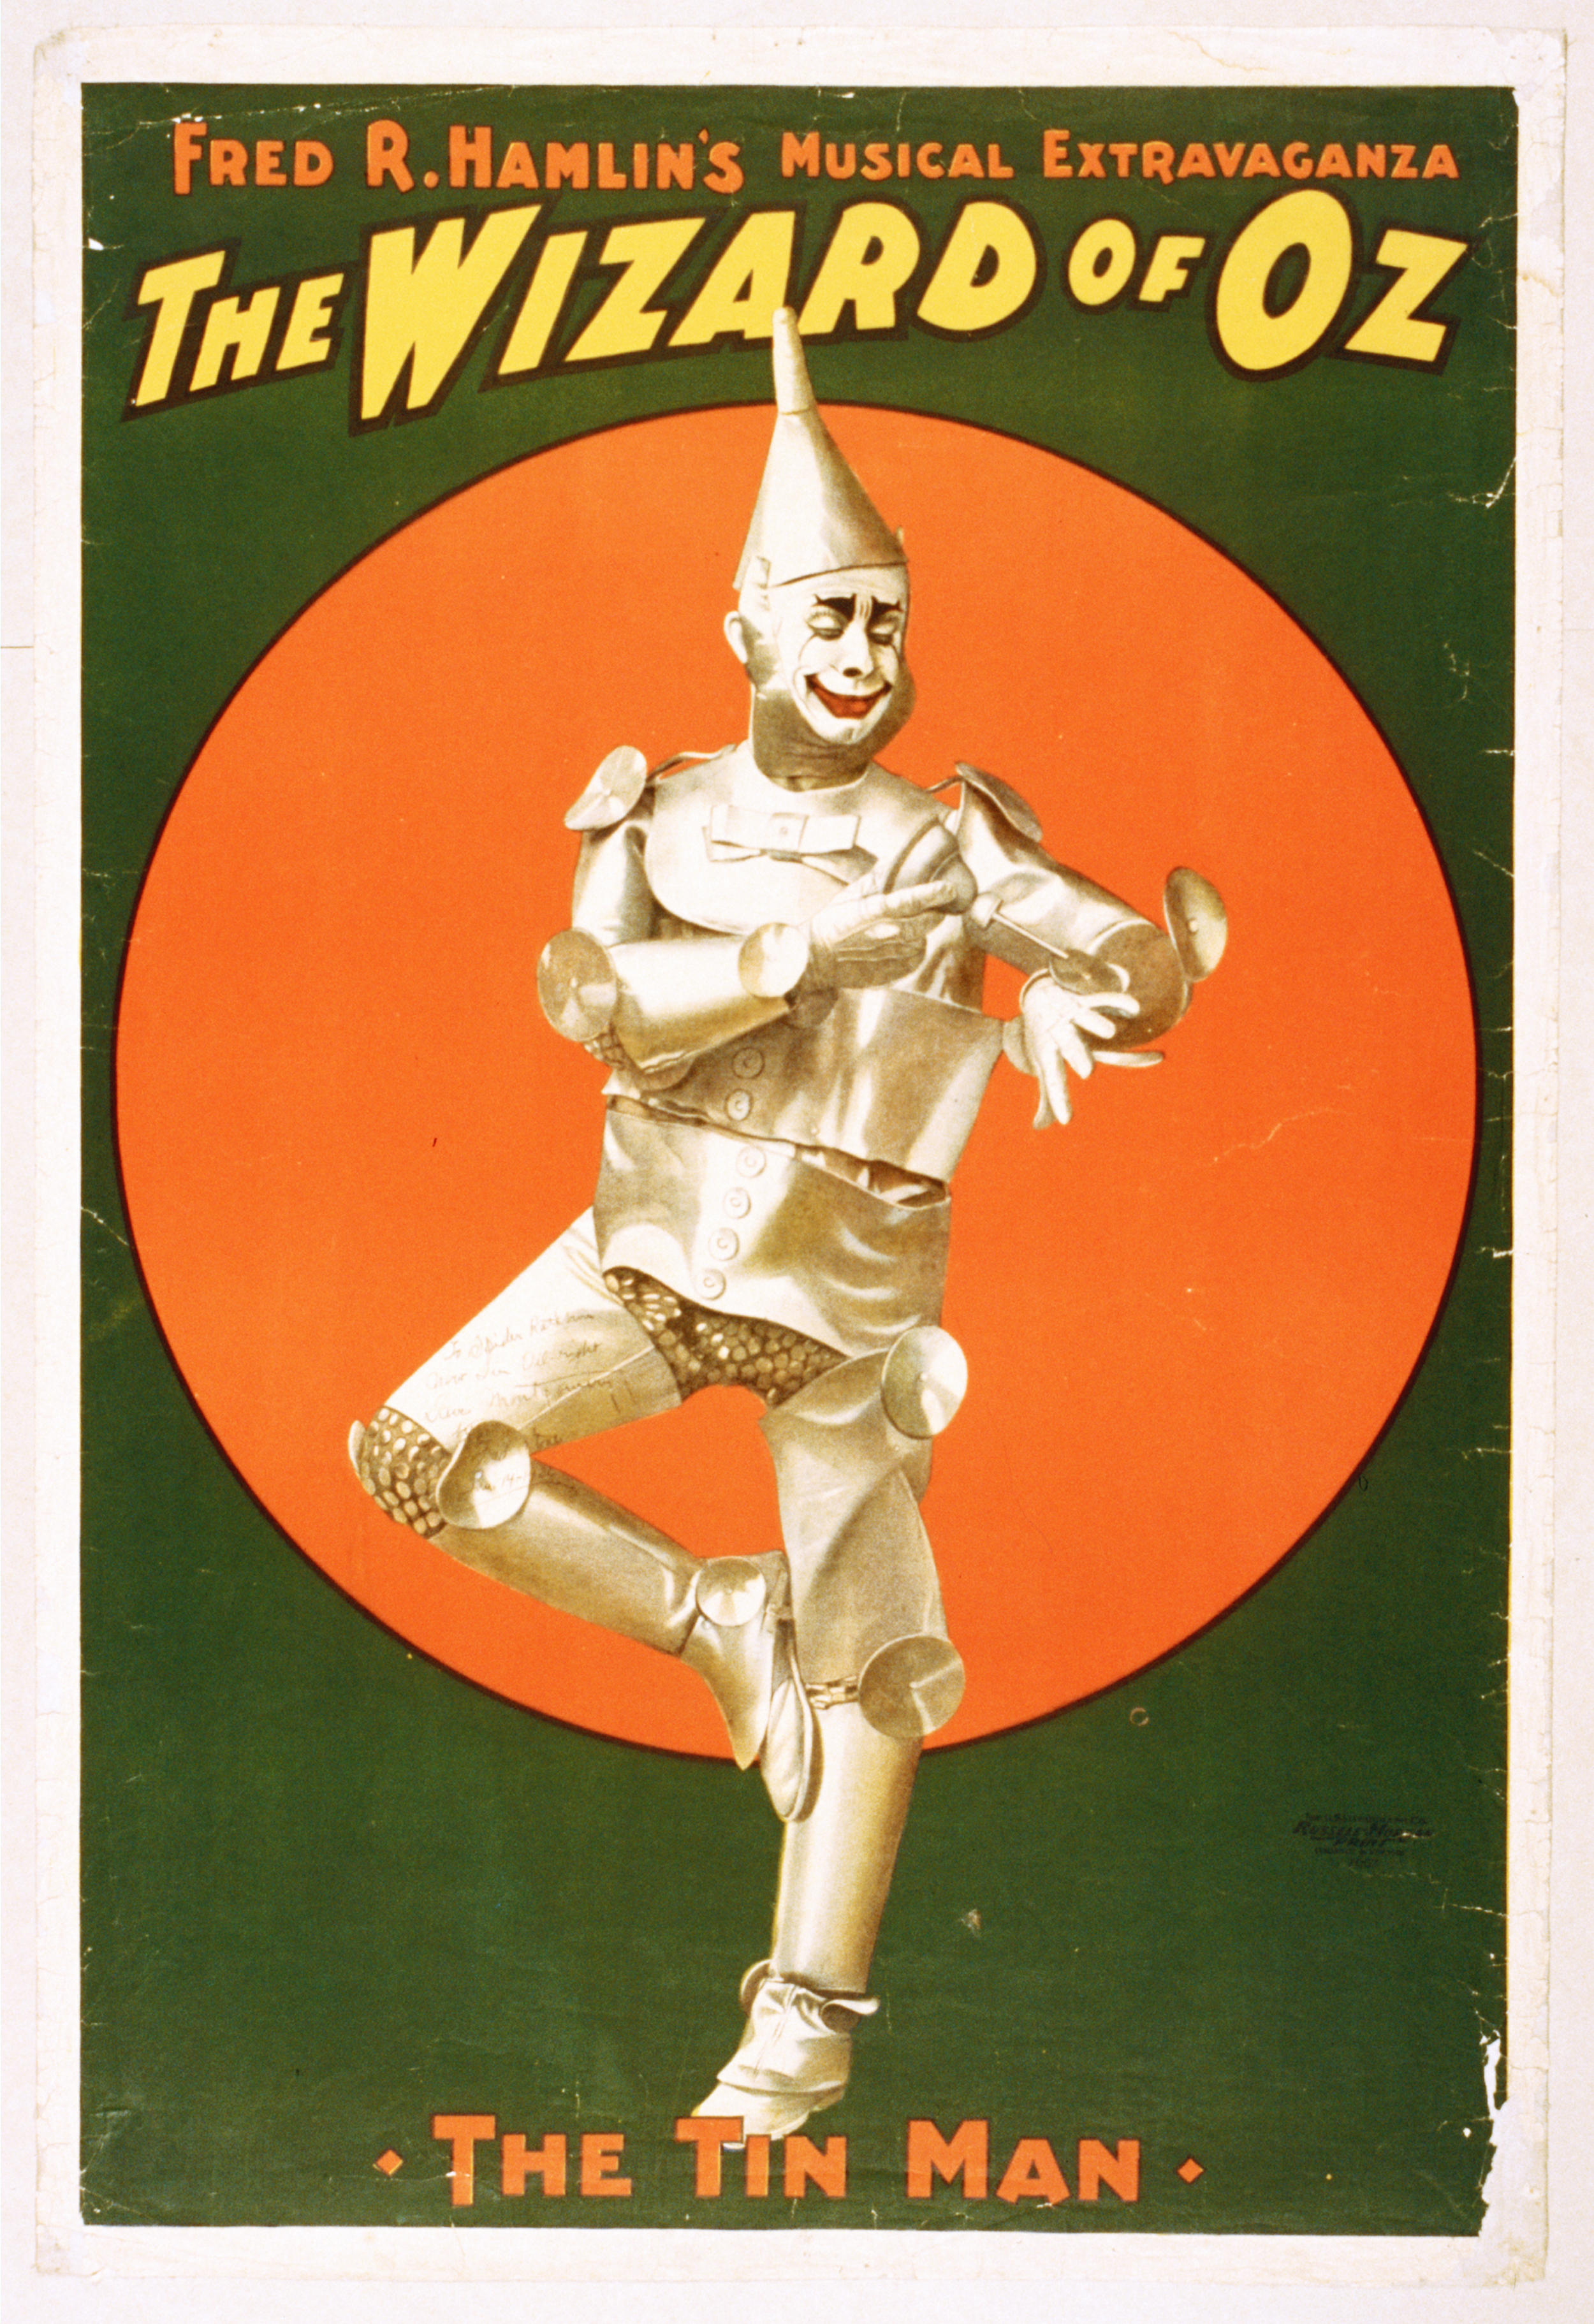 Fred r. hamlin  the wizard of oz musical  poster  1903